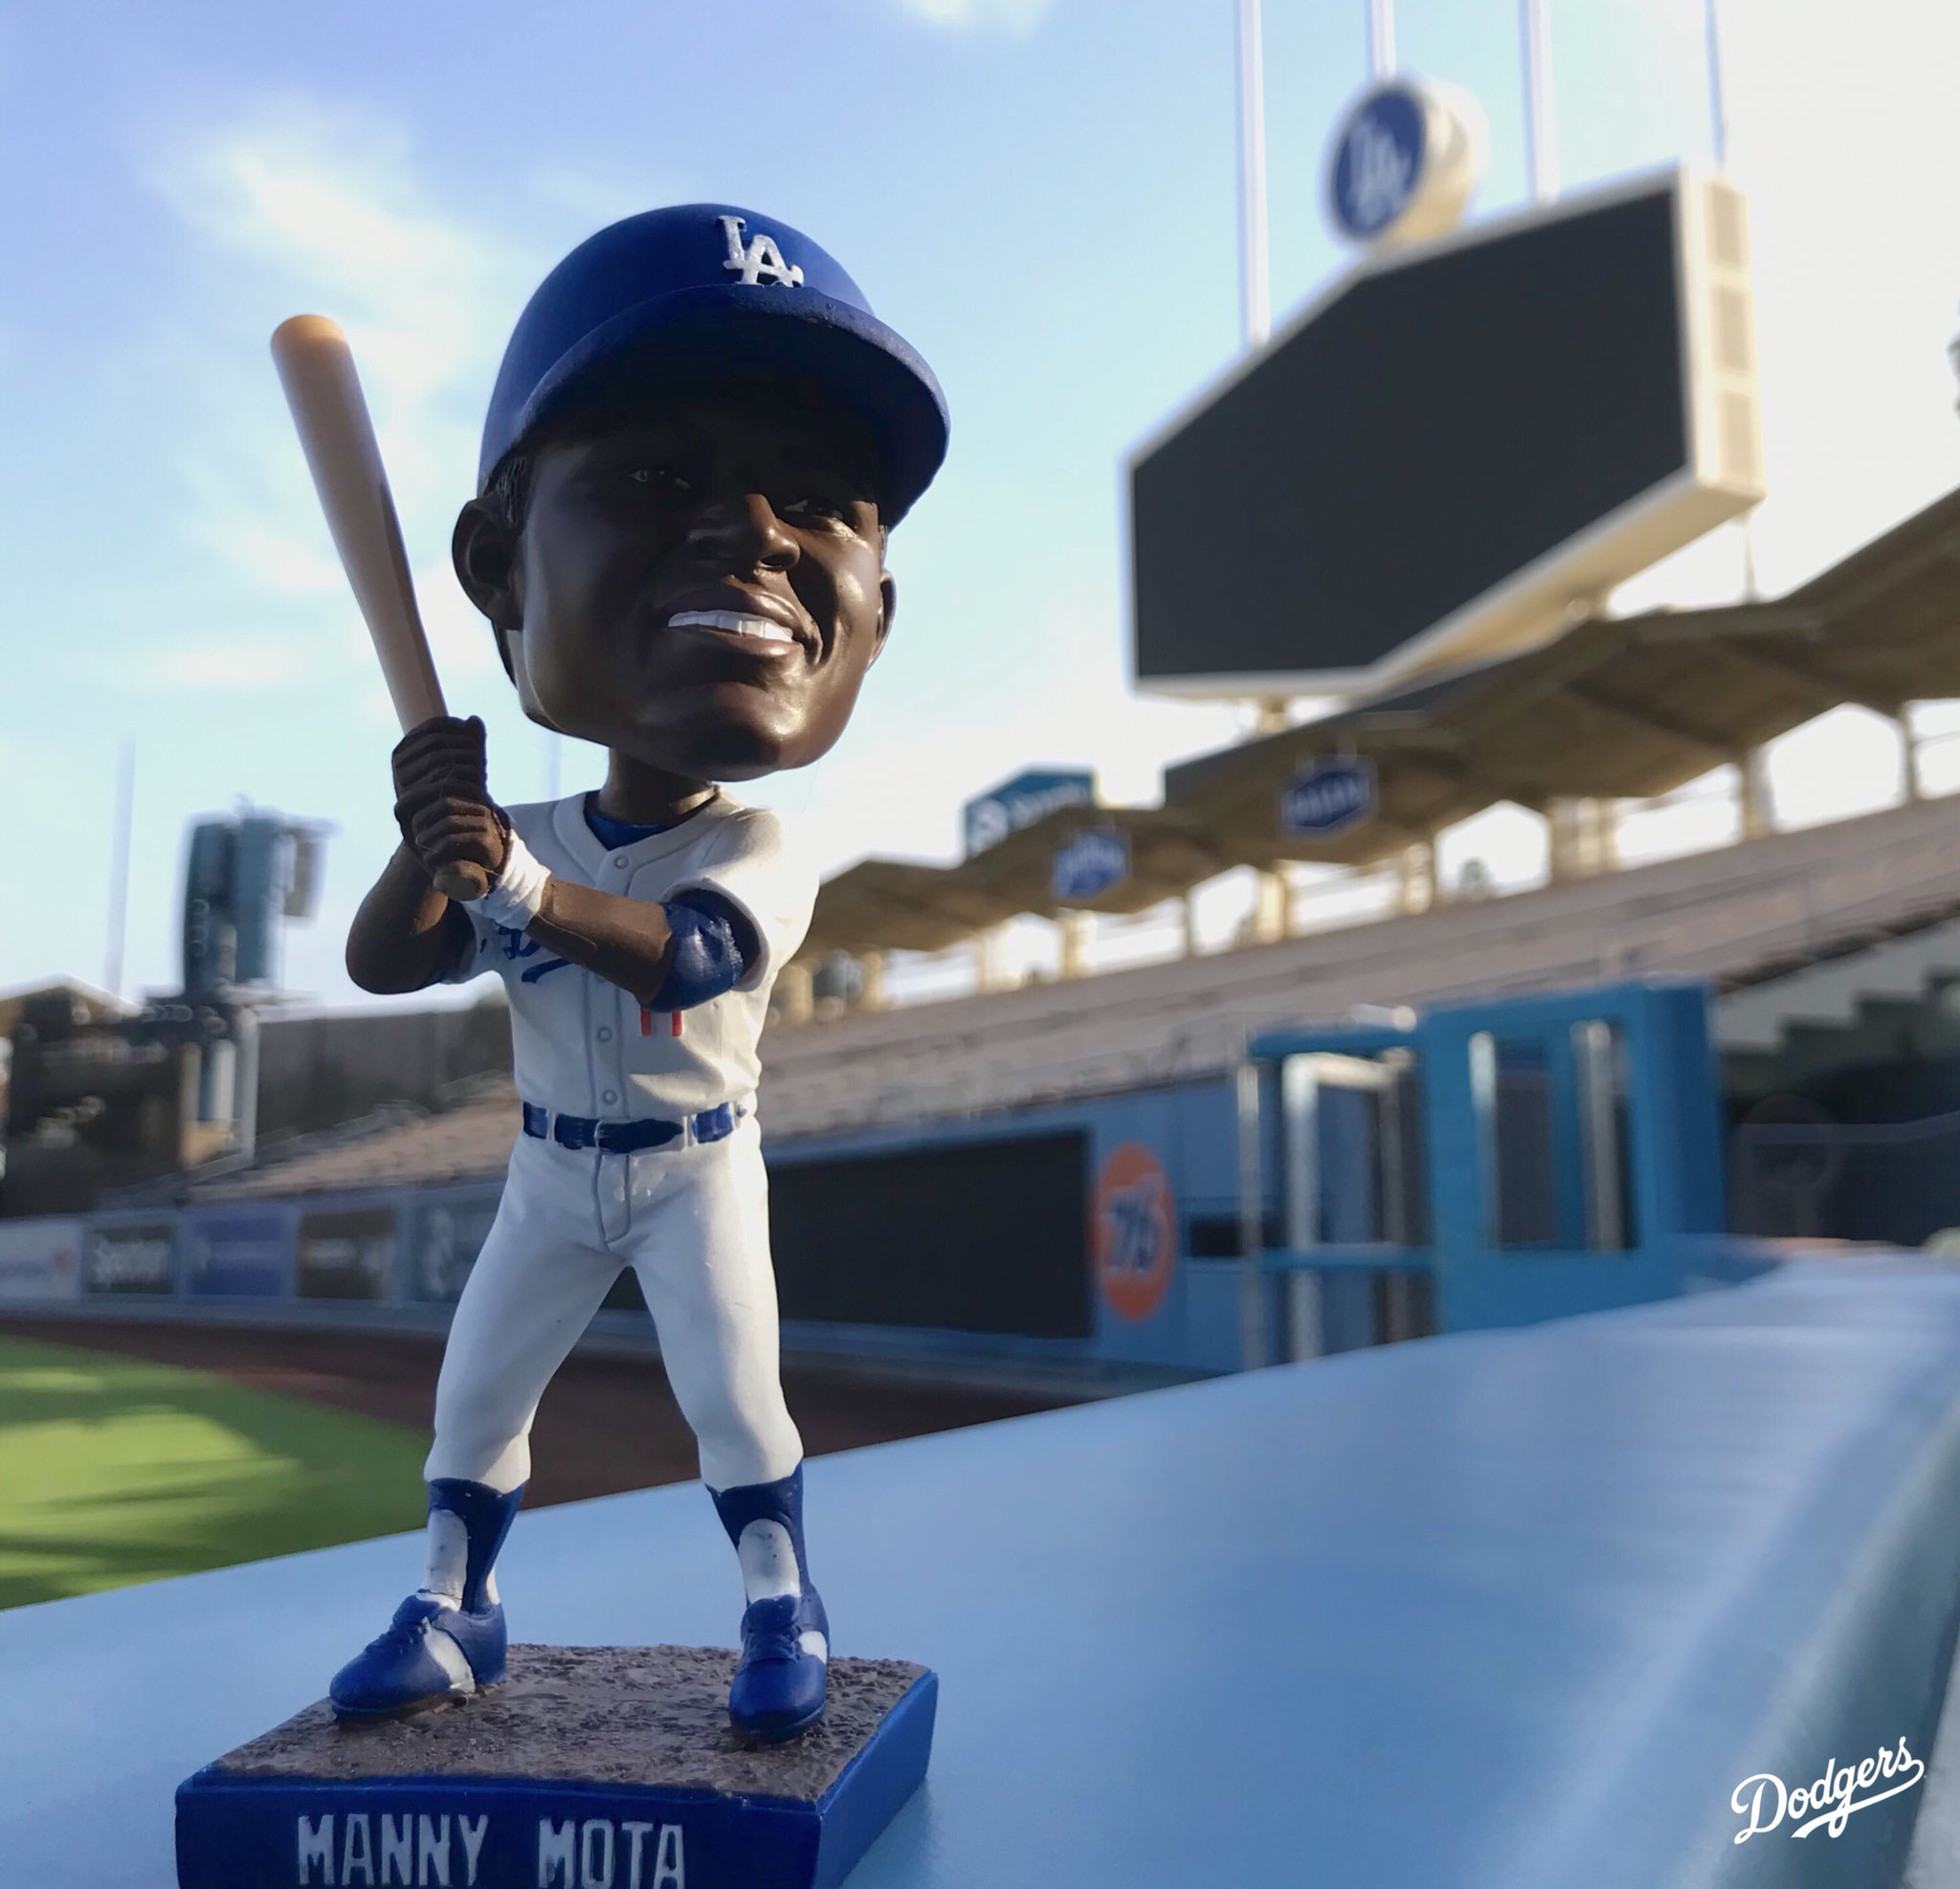 Los Angeles Dodgers on X: You know what to do! Send us your voting ballots  by 1 p.m. today to win this Manny Mota bobblehead!   #VoteMuncy